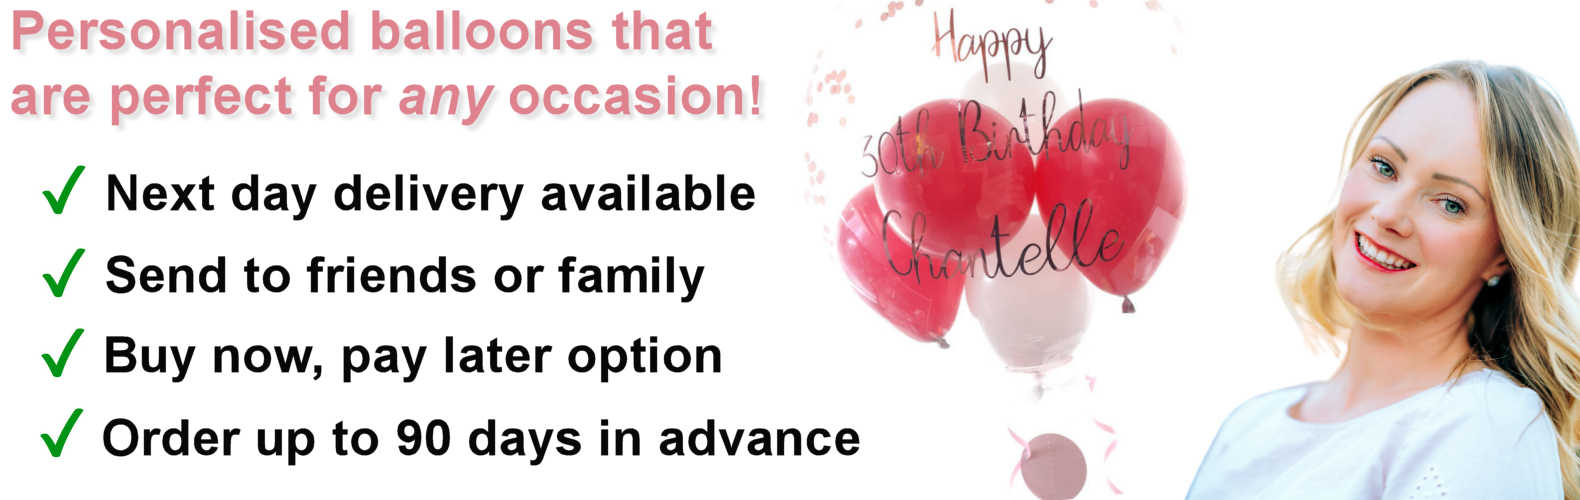 Personalised balloons for any occasion